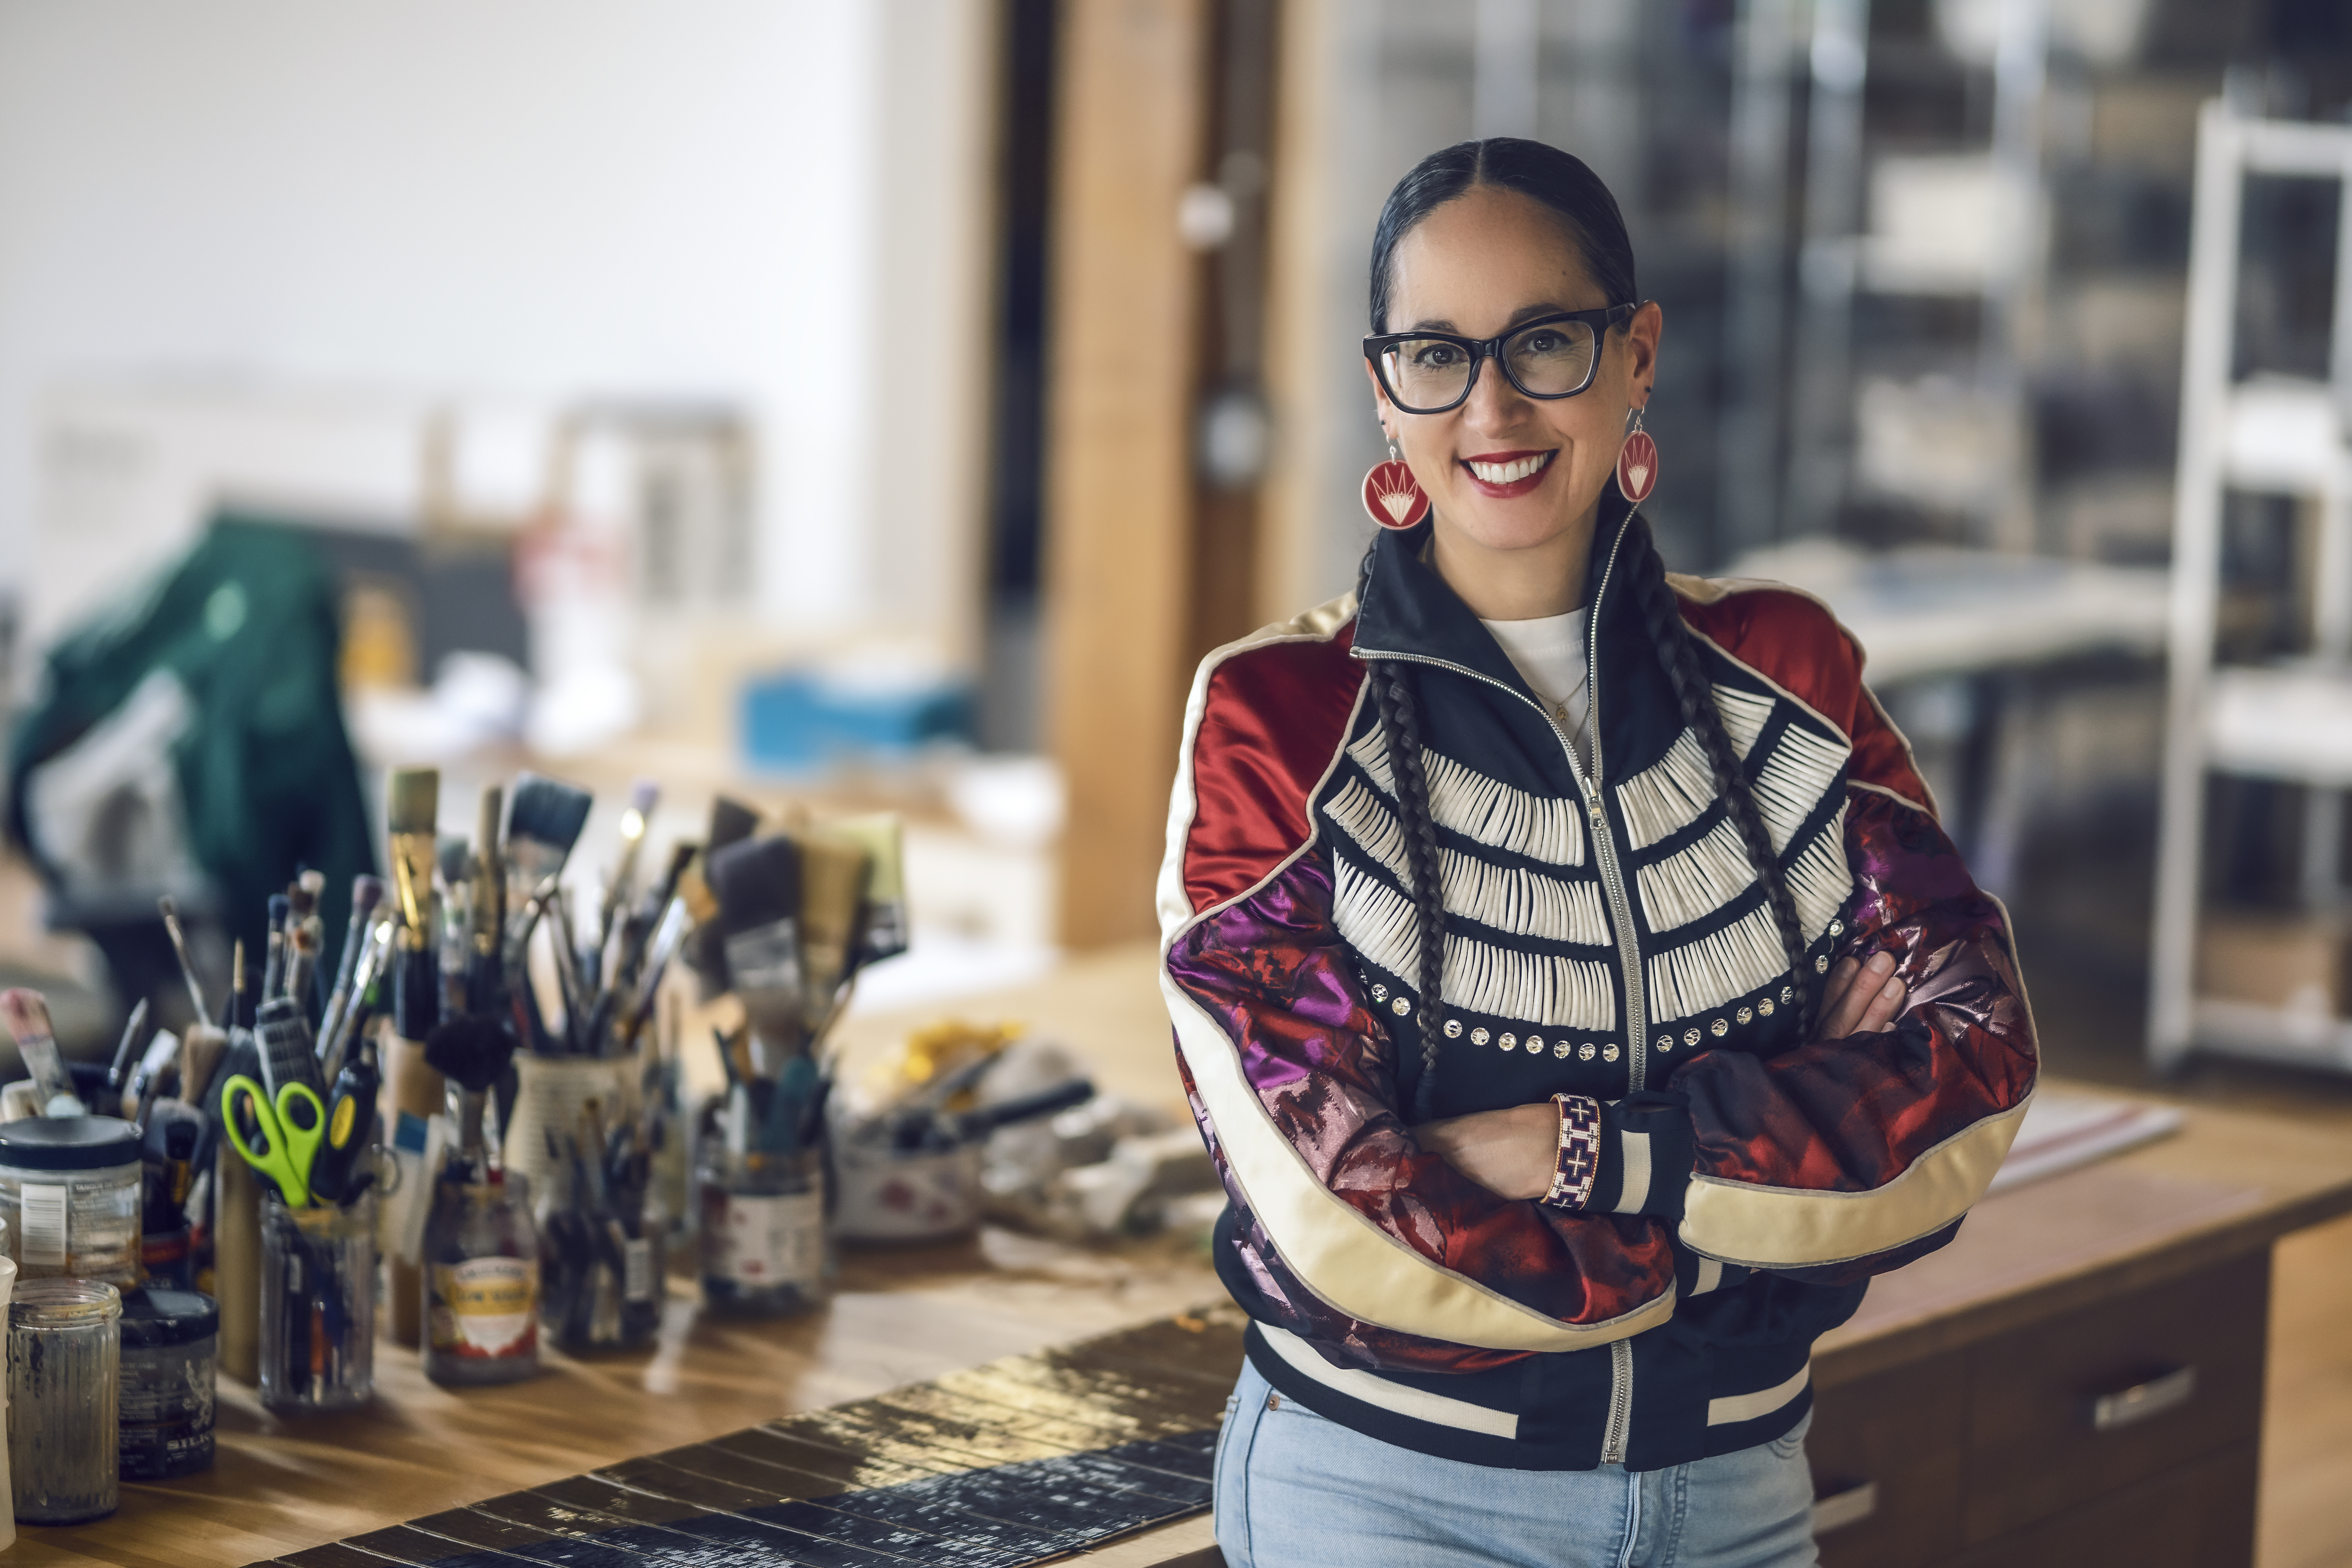  Portrait of artist Dyani White Hawk in her studio, standing in front of a desk with various containers on it that are filled with brushes and other tools. Dyani is sporting a colorful patterned bomber jacket, jeans, big red earrings, two long braids, and glasses with black frames. 